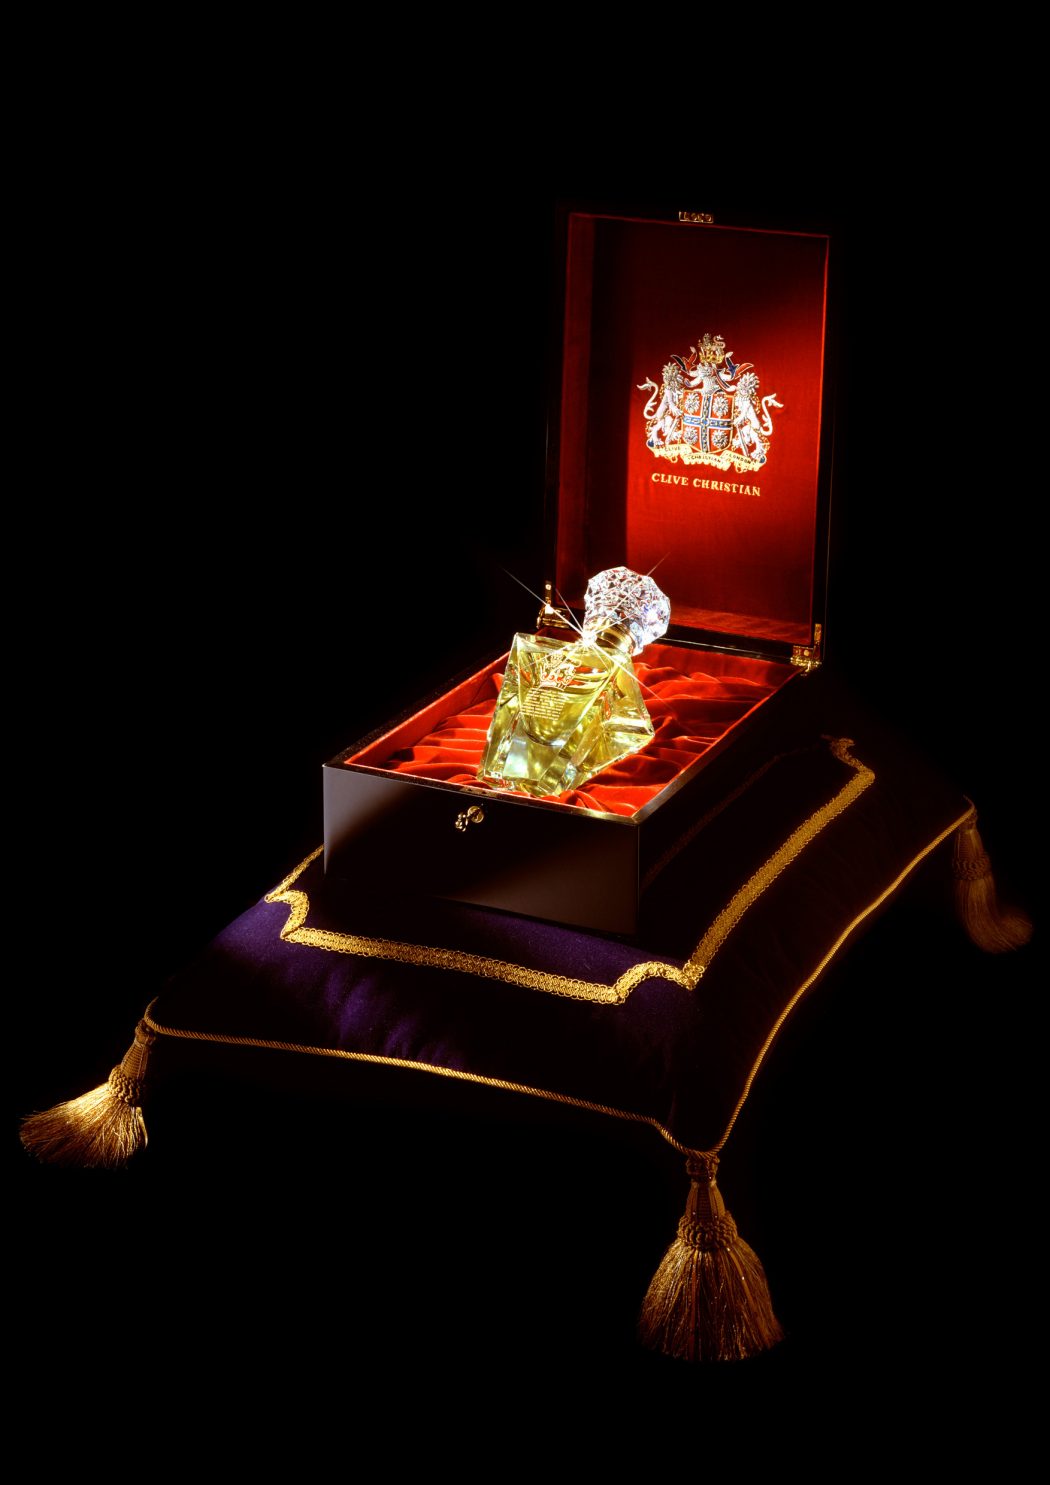 clive-christian-no-1-perfume-imperial-majesty-edition-in-box 10 Most Expensive Perfumes for Men in The World